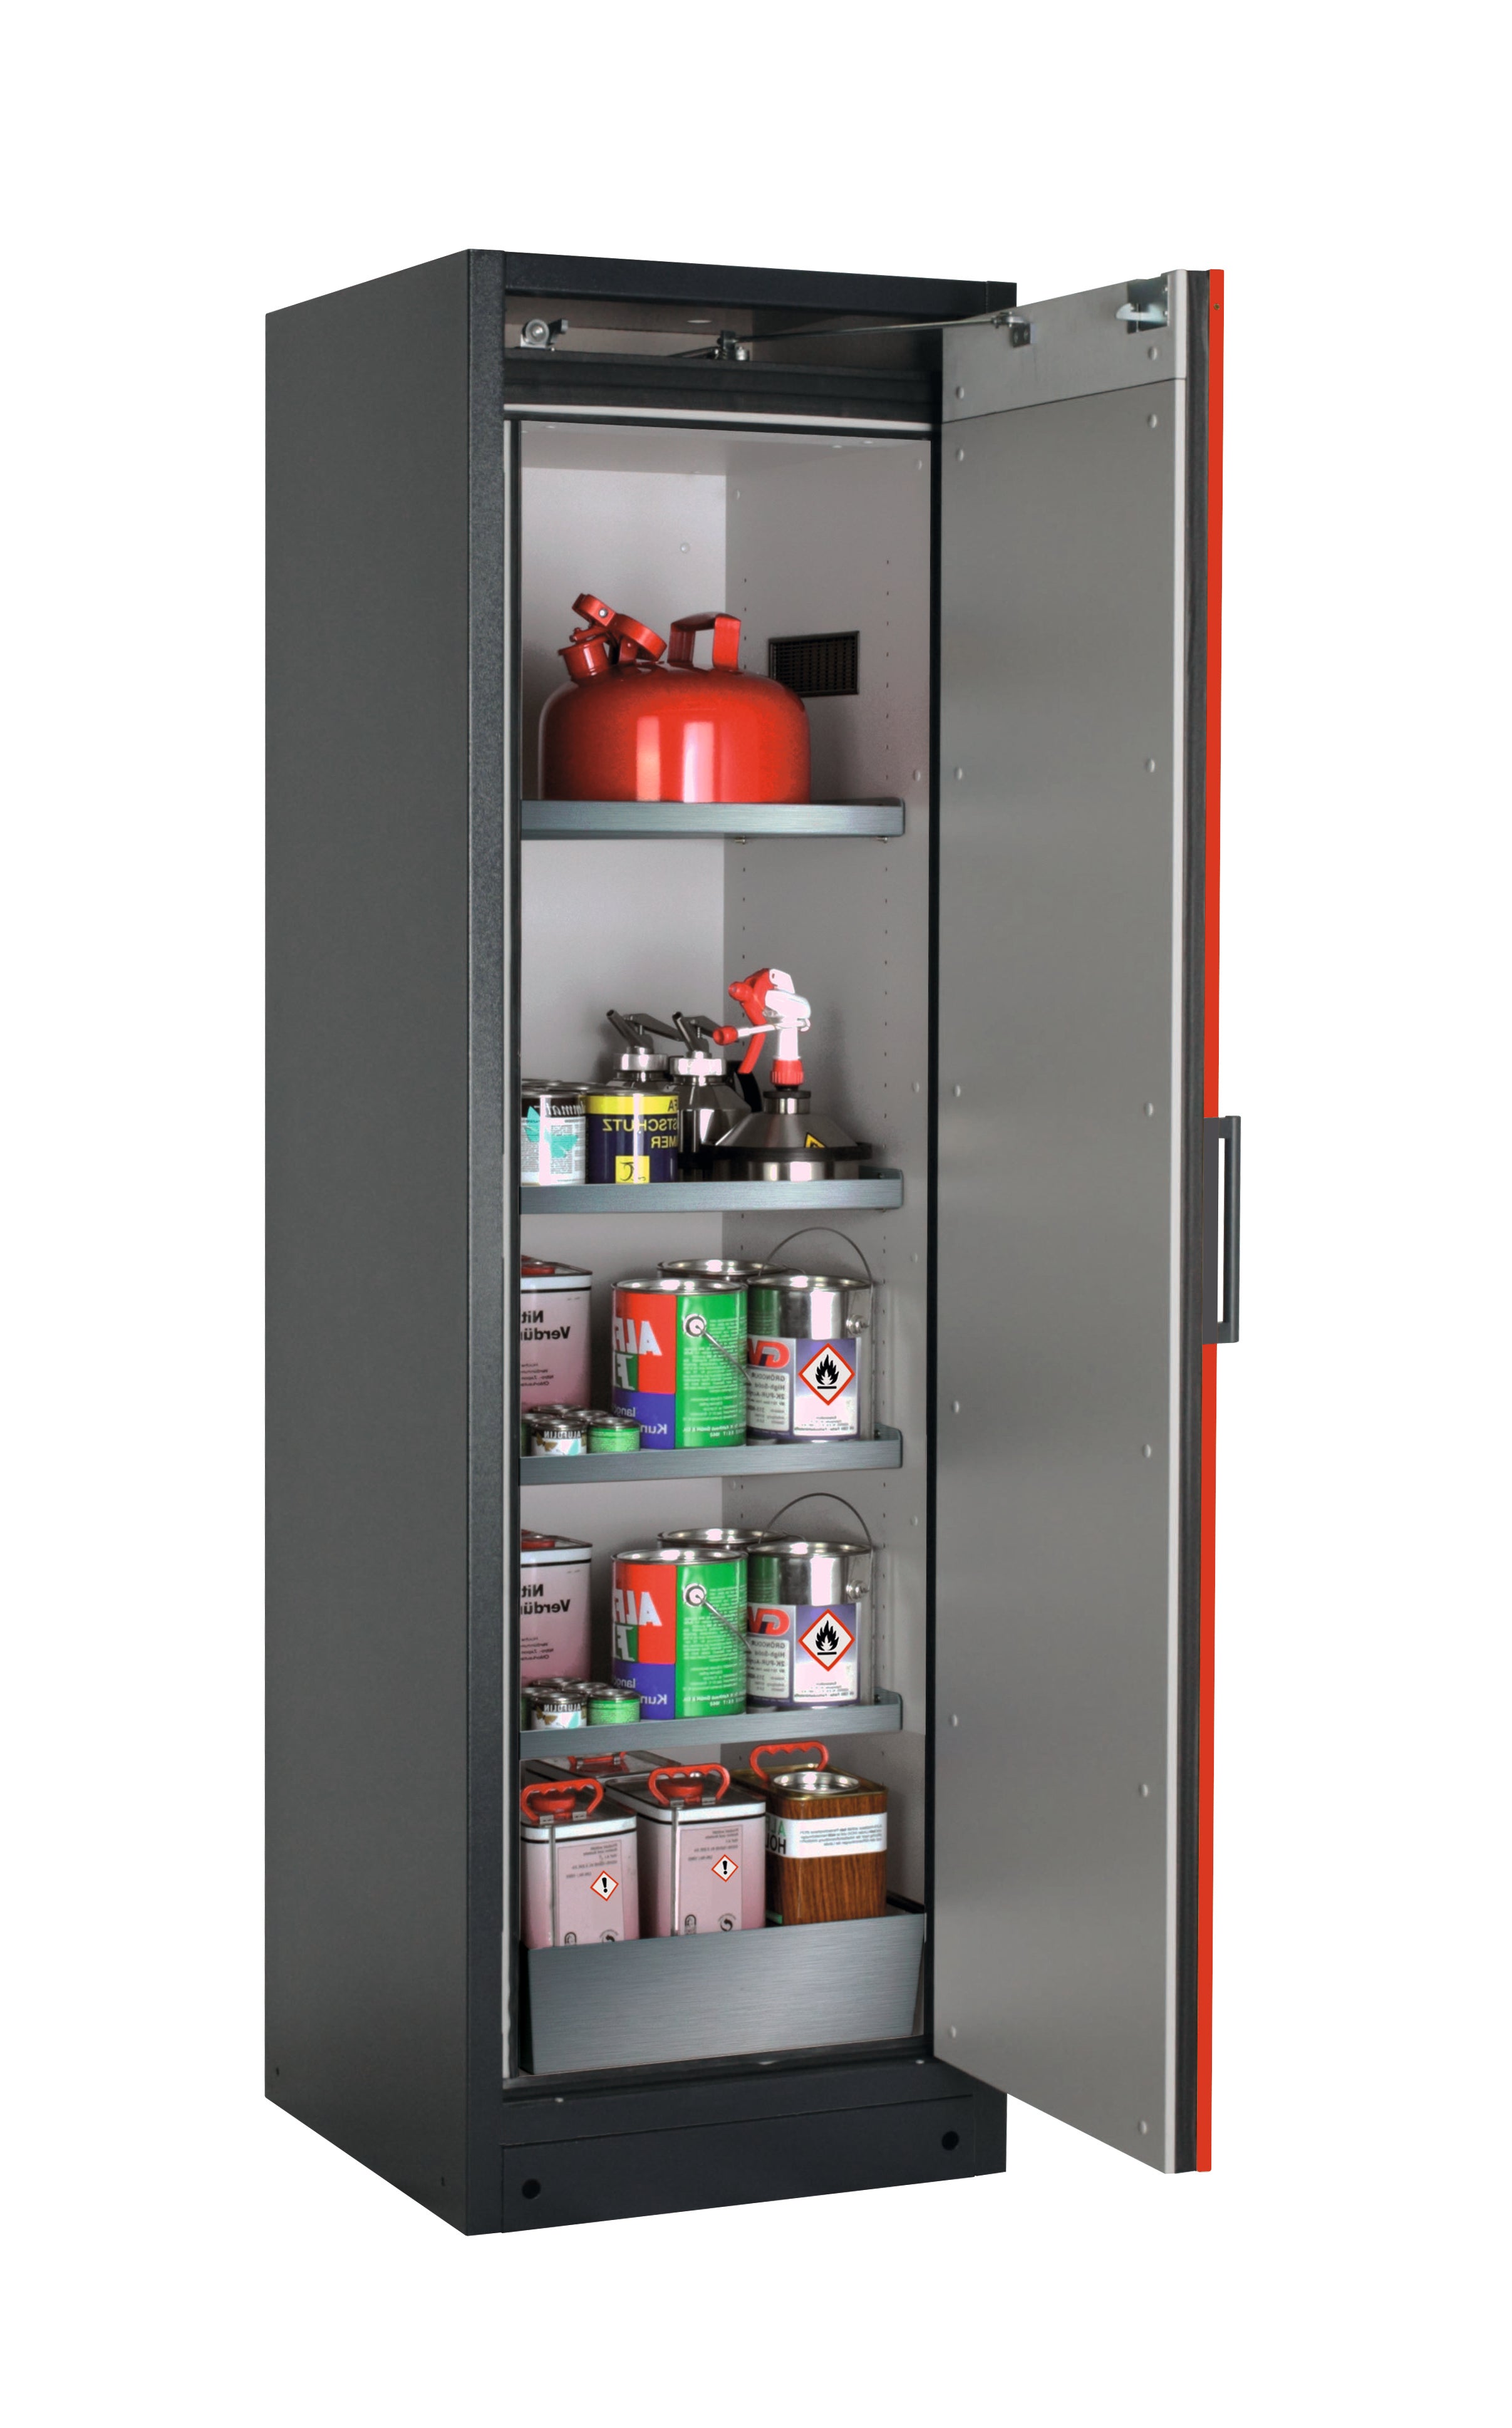 Type 90 safety storage cabinet Q-PEGASUS-90 model Q90.195.060.WDACR in traffic red RAL 3020 with 4x shelf standard (stainless steel 1.4301),